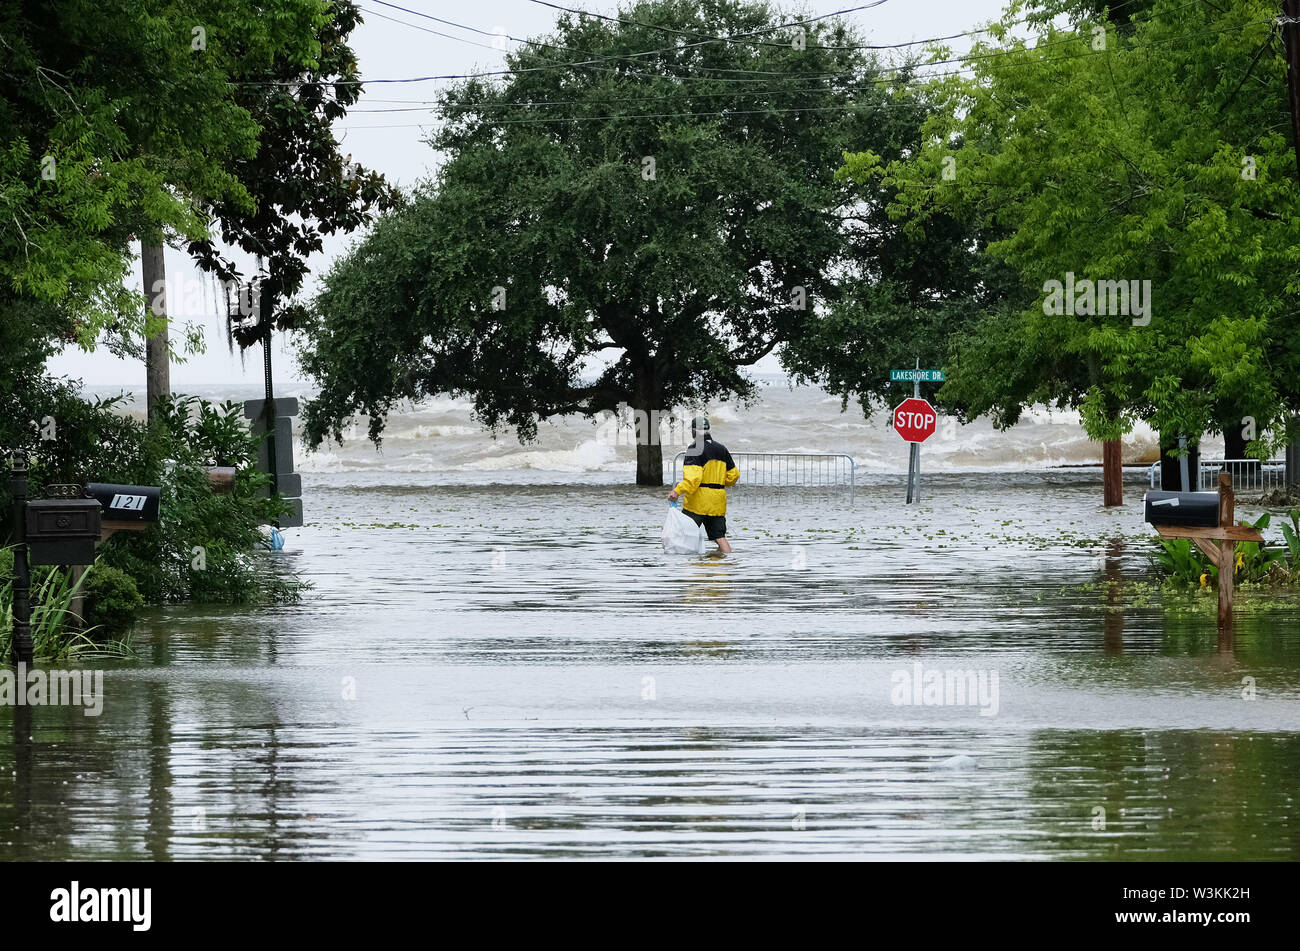 July 13, 2019 - Mandeville, LOUISIANA, U.S - A man walks through a flooded road to take out his trash near Lake Pontchartrain in Mandeville, Louisiana USA as Hurricane Barry makes landfall on July 13, 2019. (Credit Image: © Dan Anderson/ZUMA Wire) Stock Photo